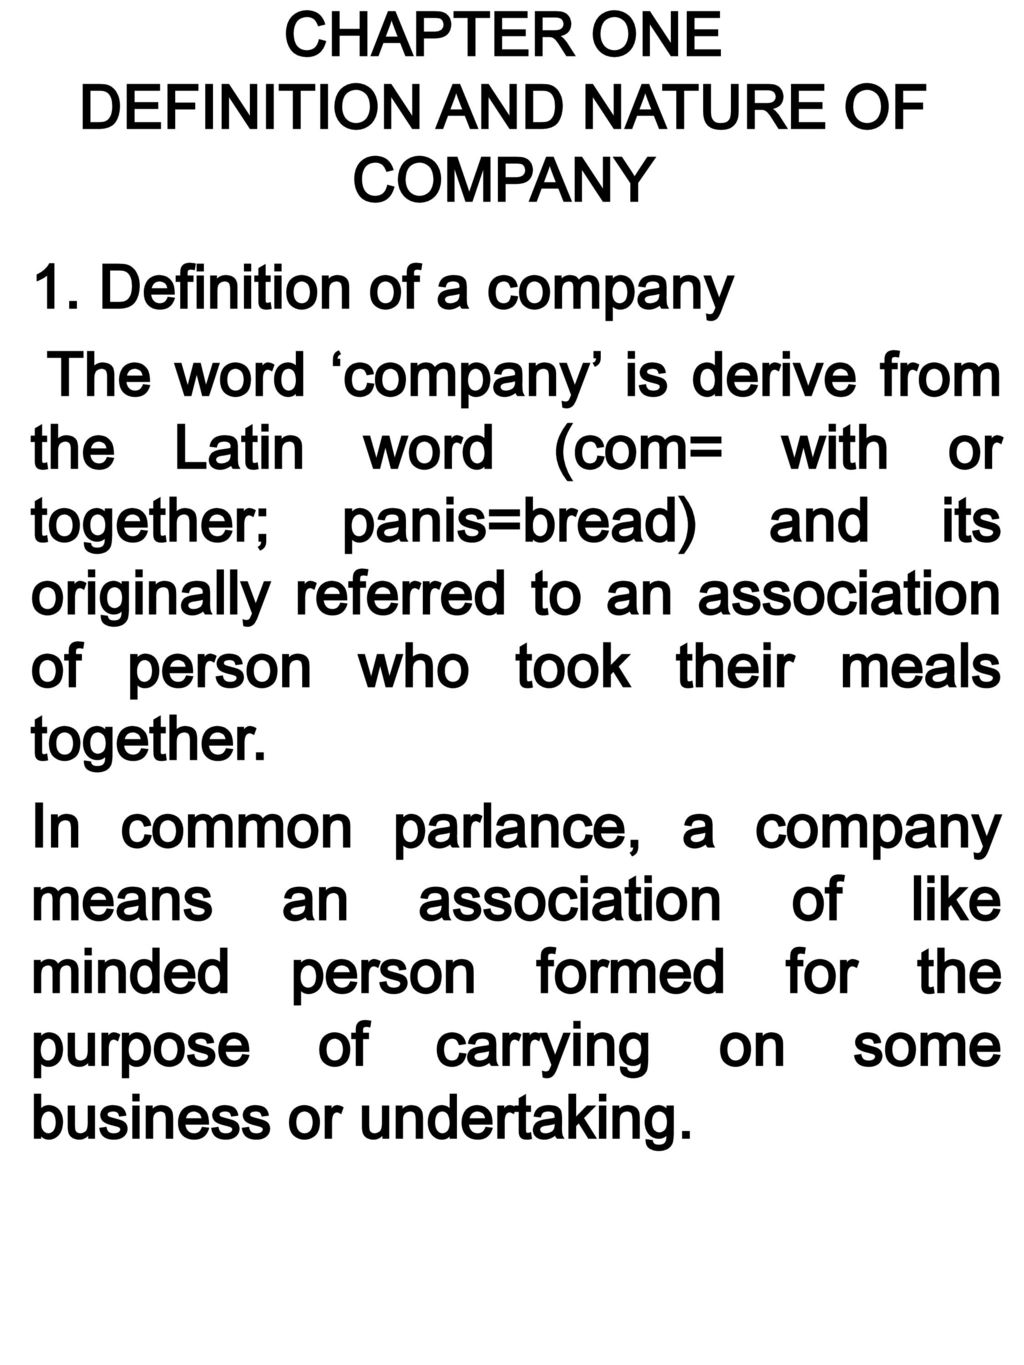 CHAPTER ONE DEFINITION AND NATURE OF COMPANY - ppt download